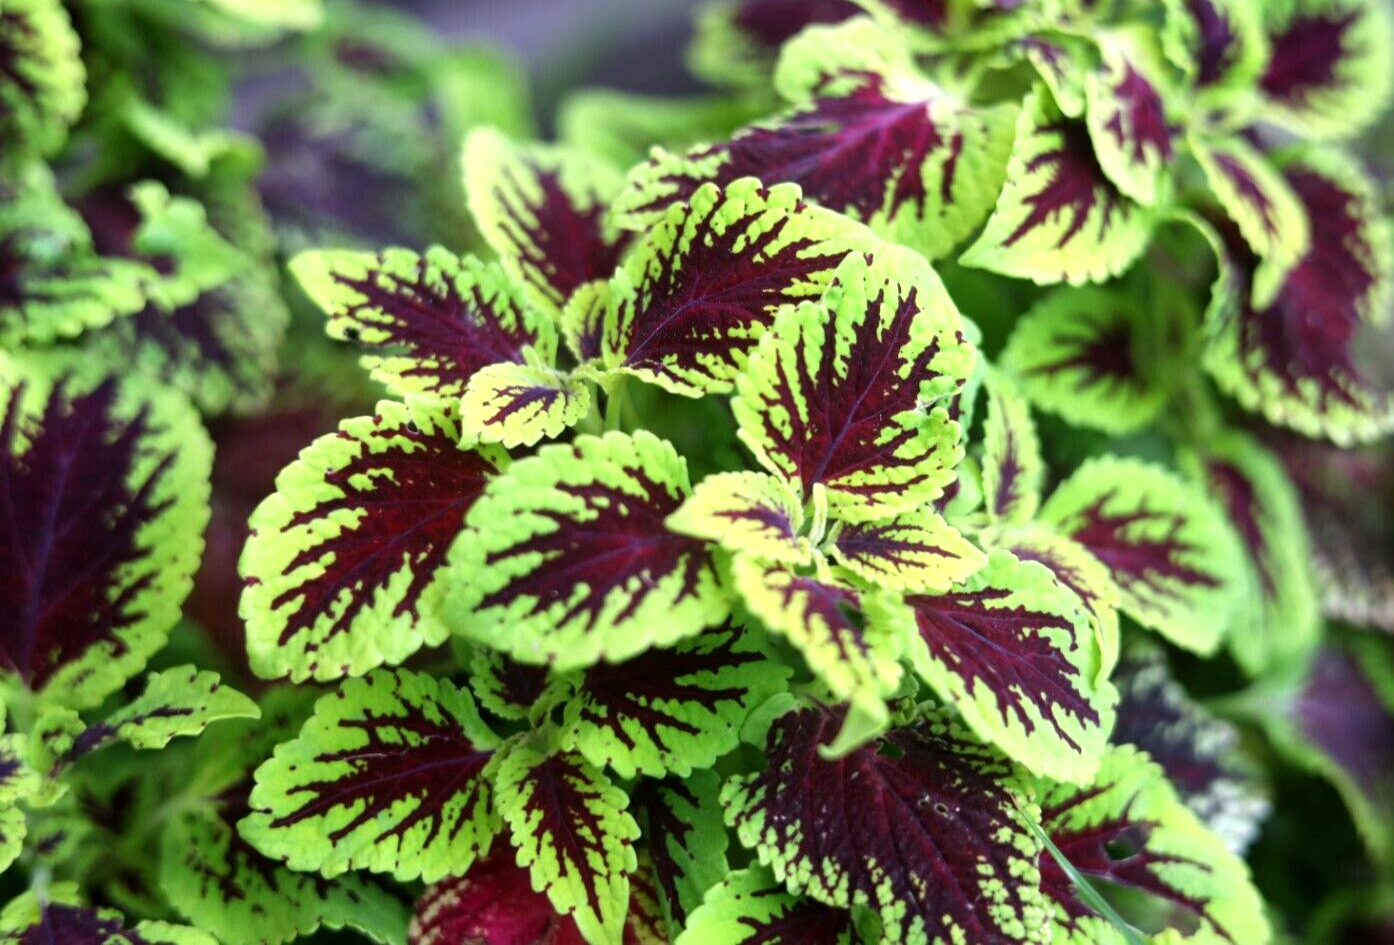 10 Coleus Cuttings very easy to root, partial shade tropical plant.